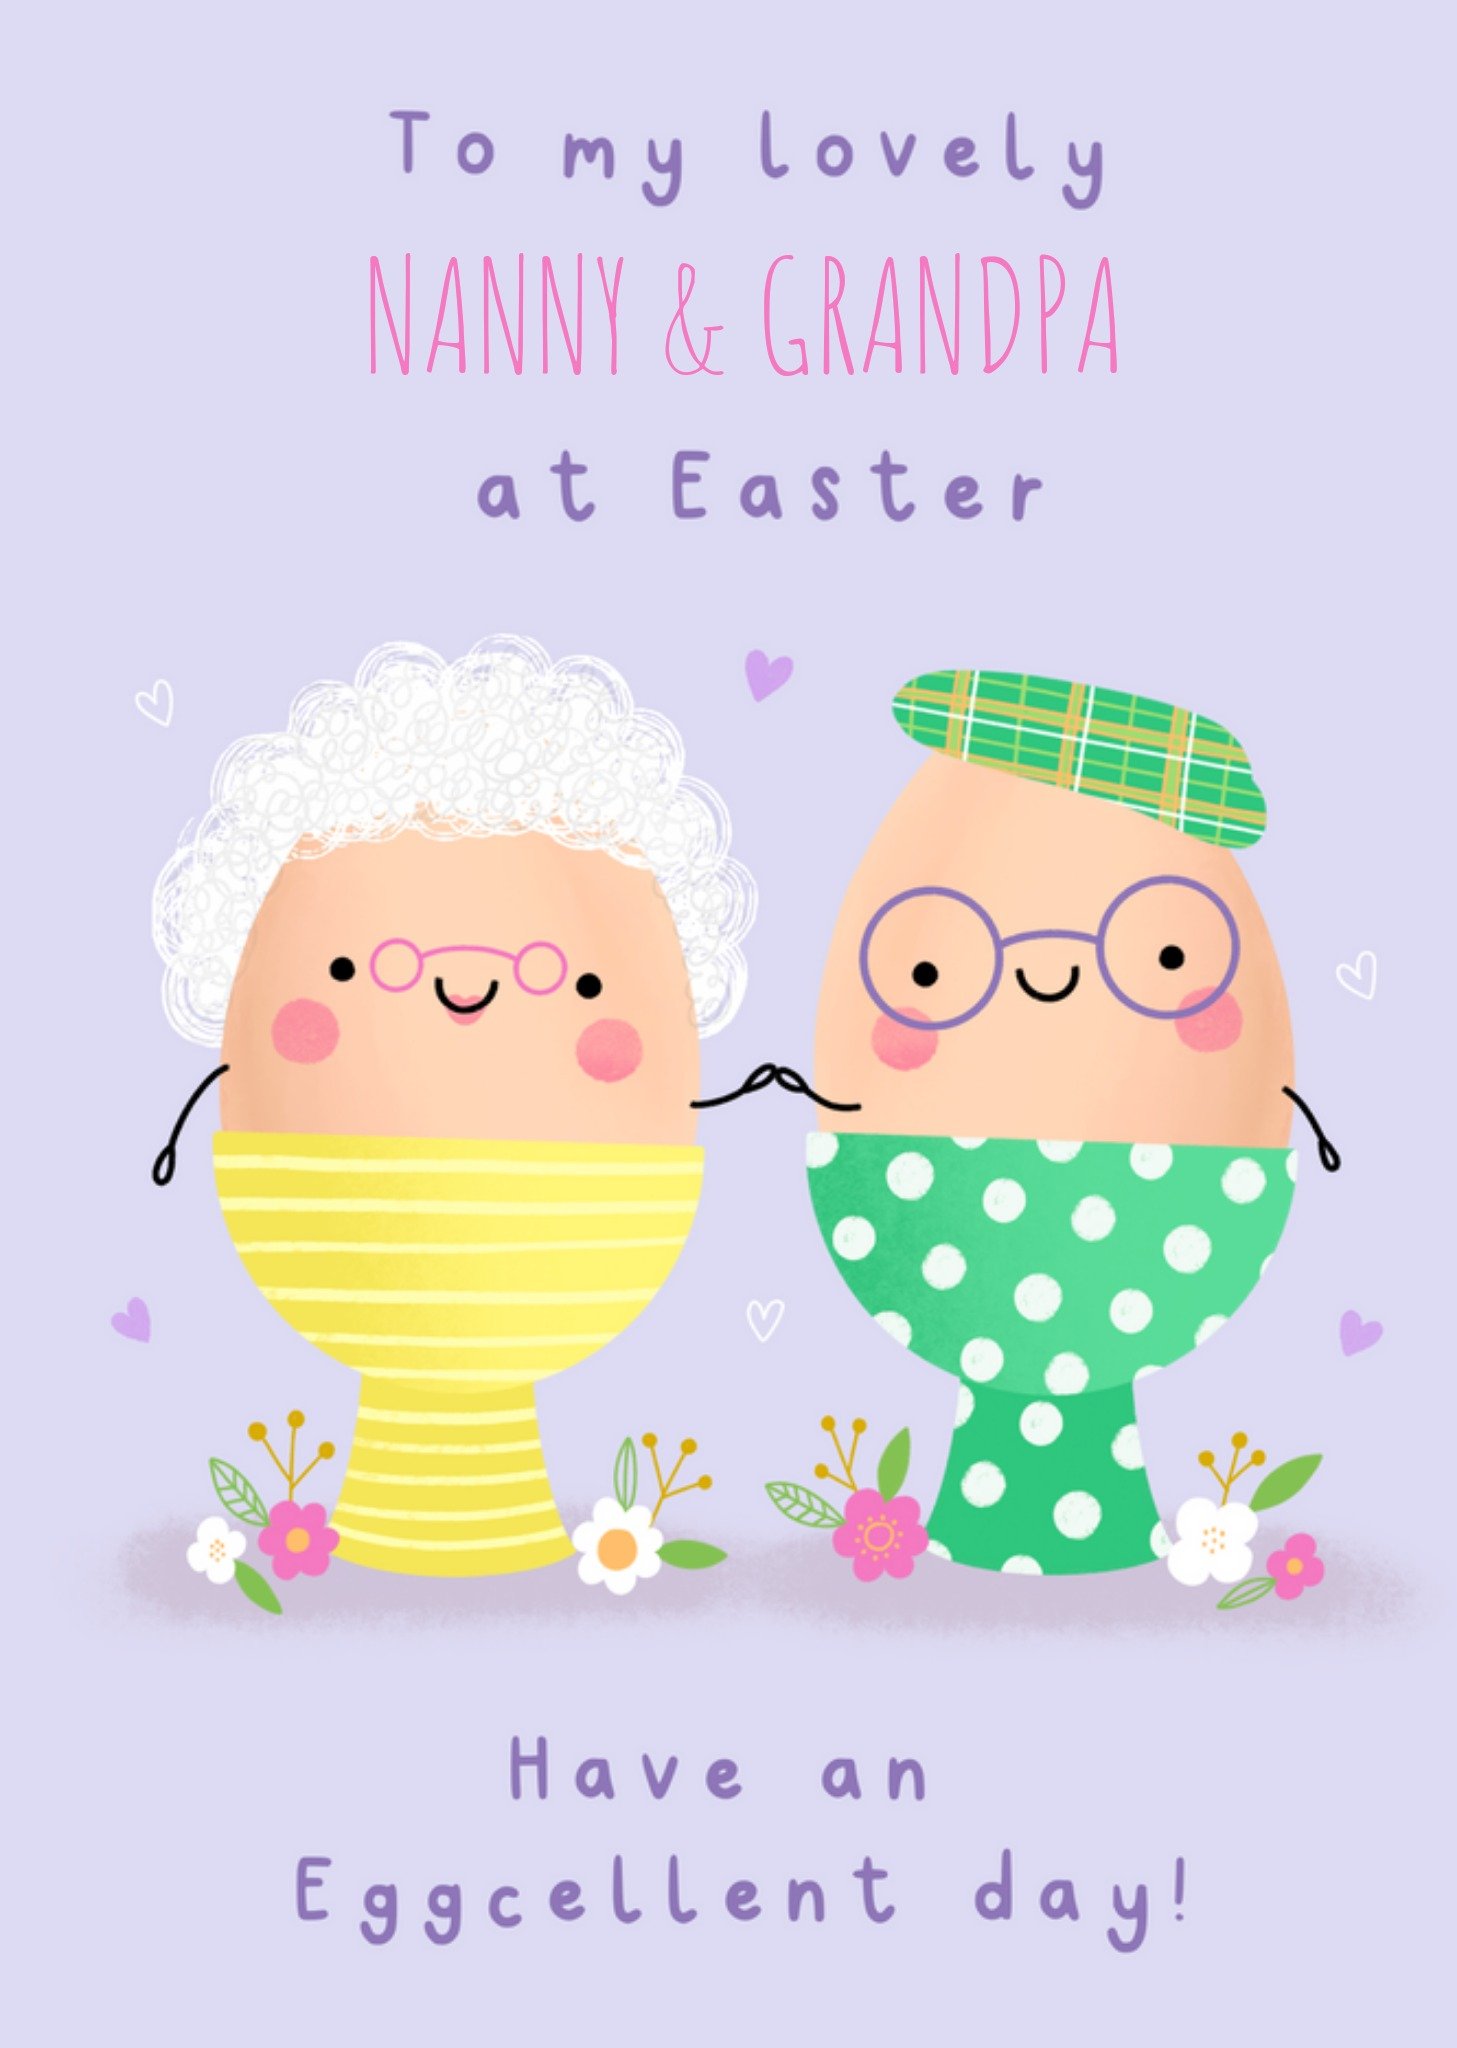 Moonpig Jess Moorhouse Nanny And Grandad Have An Eggcellent Day Illustrated Easter Card Ecard